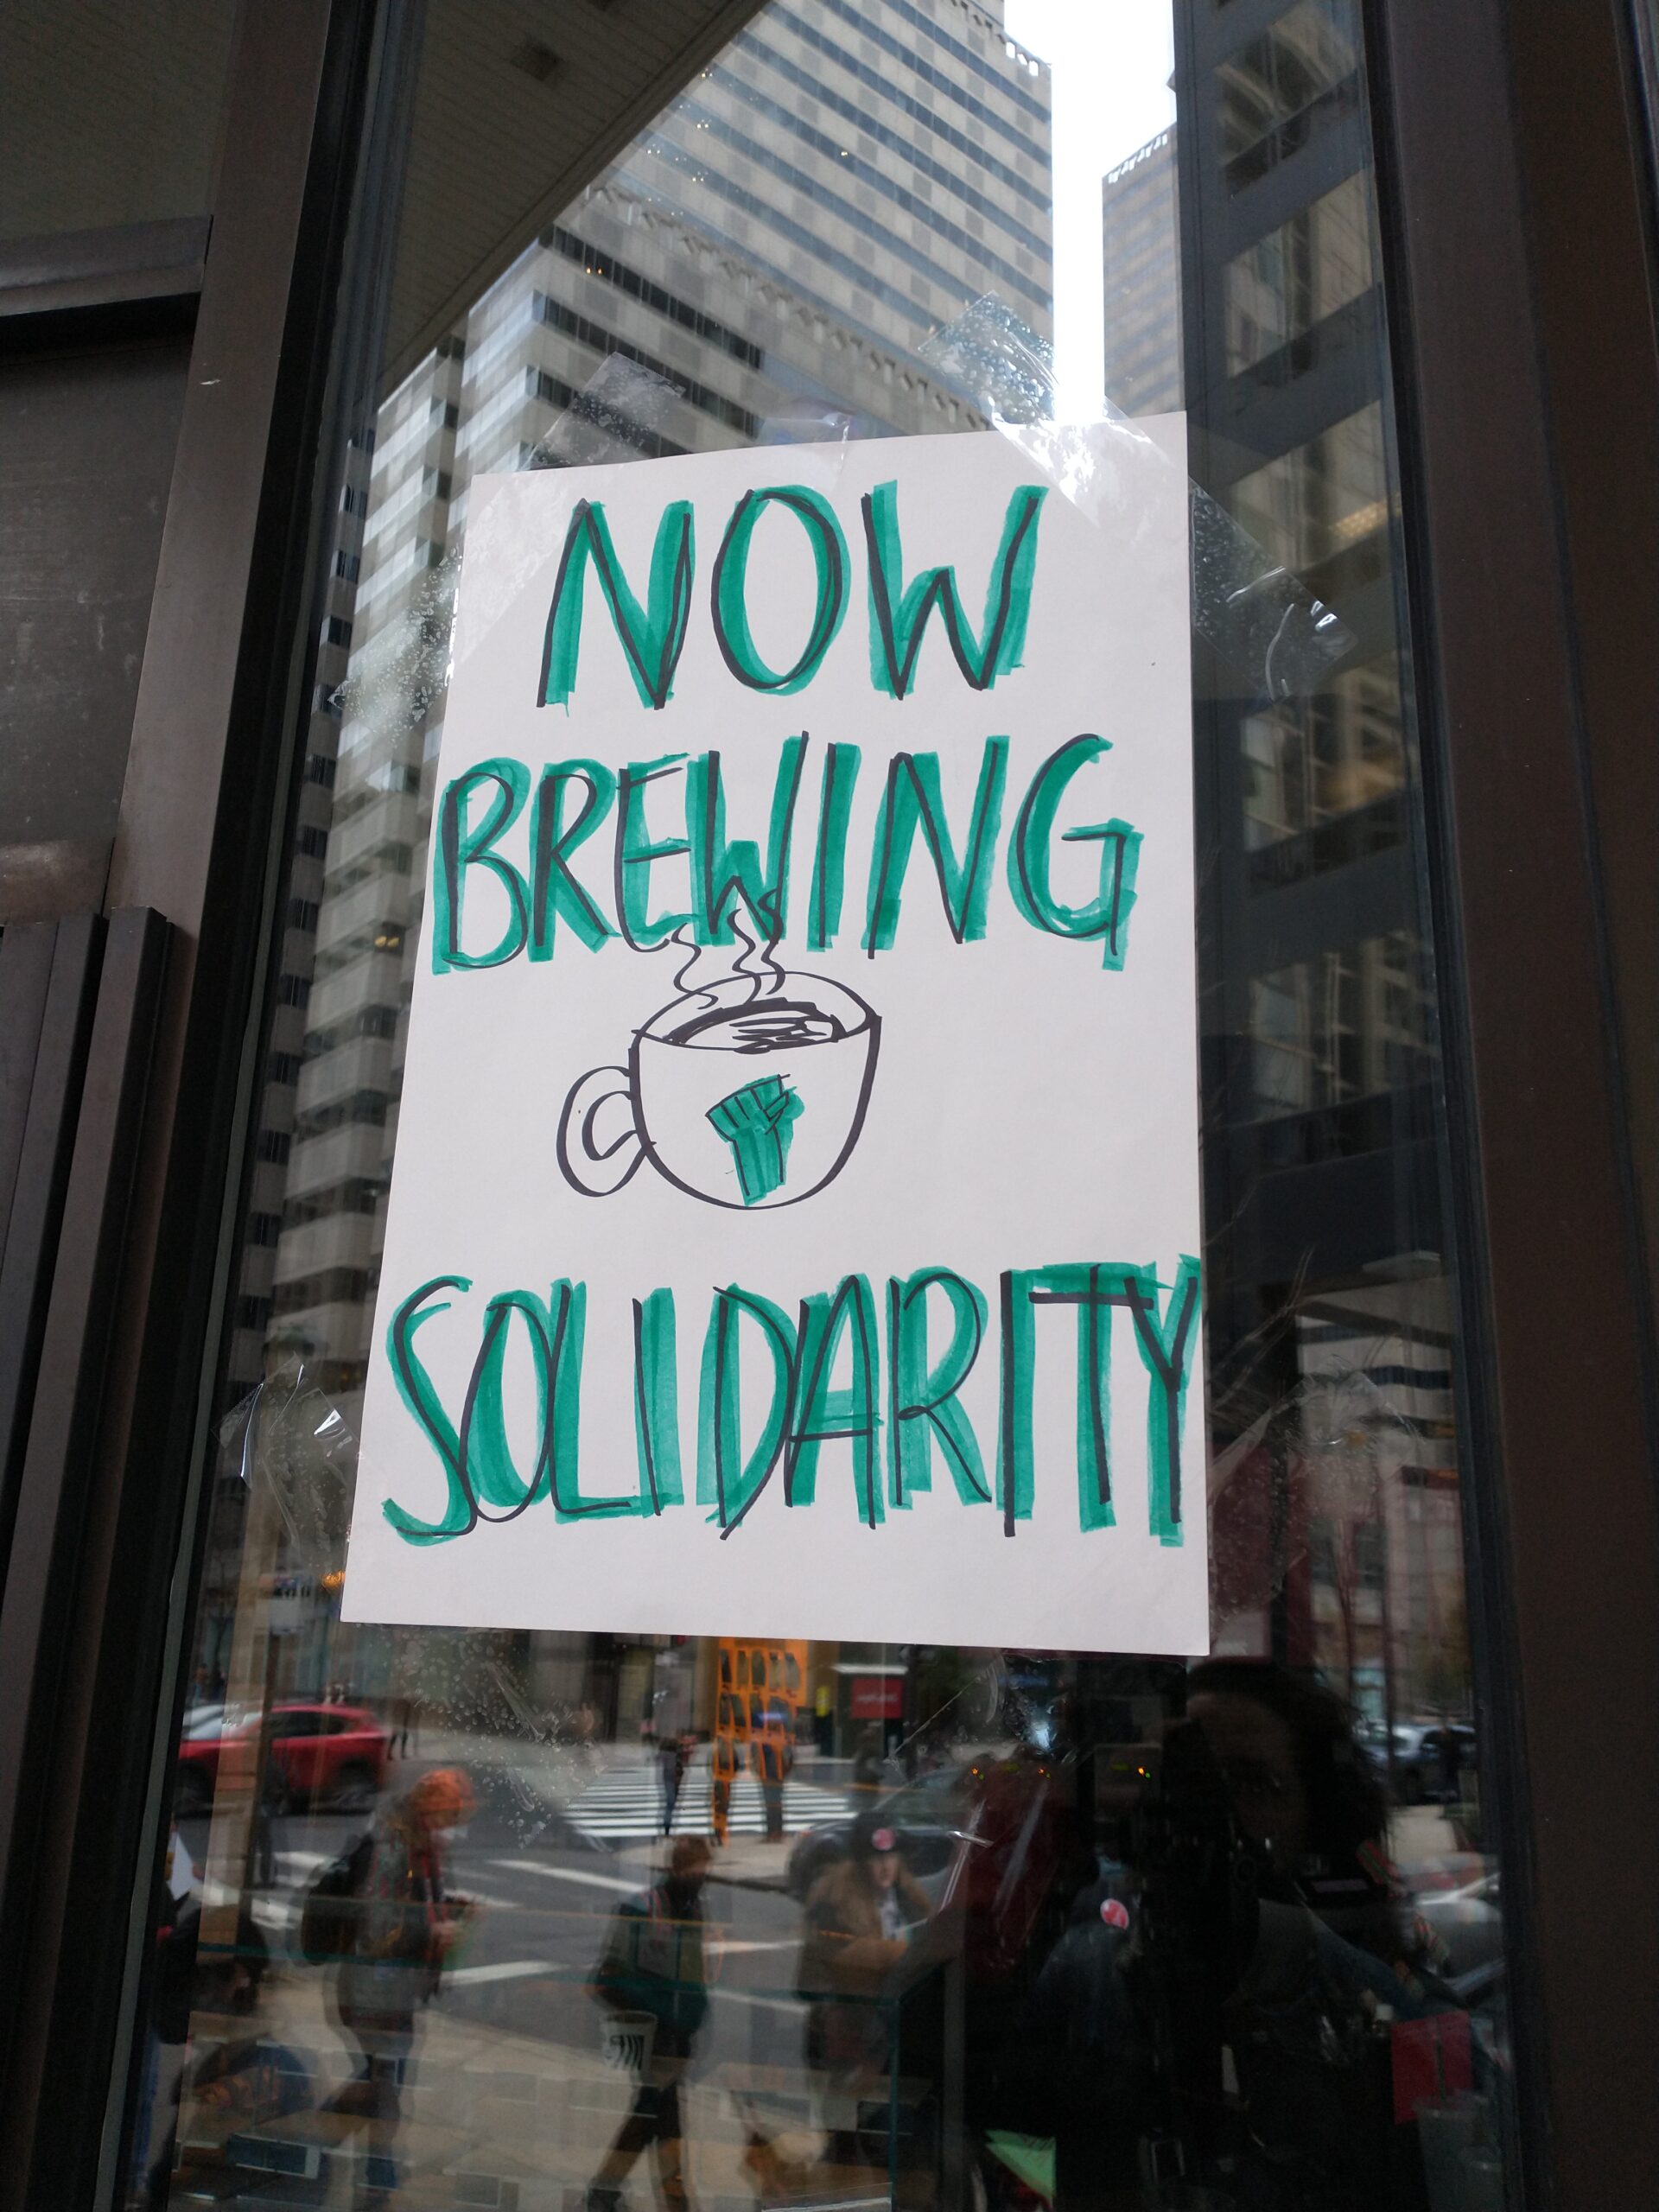 A hand-drawn sign taped to the glass window of a Starbucks store, written in the same green as the Starbucks logo, reads, “NOW BREWING SOLIDARITY.” Above the word “SOLIDARITY” is a drawing of a steaming cup of coffee with a green solidarity fist.